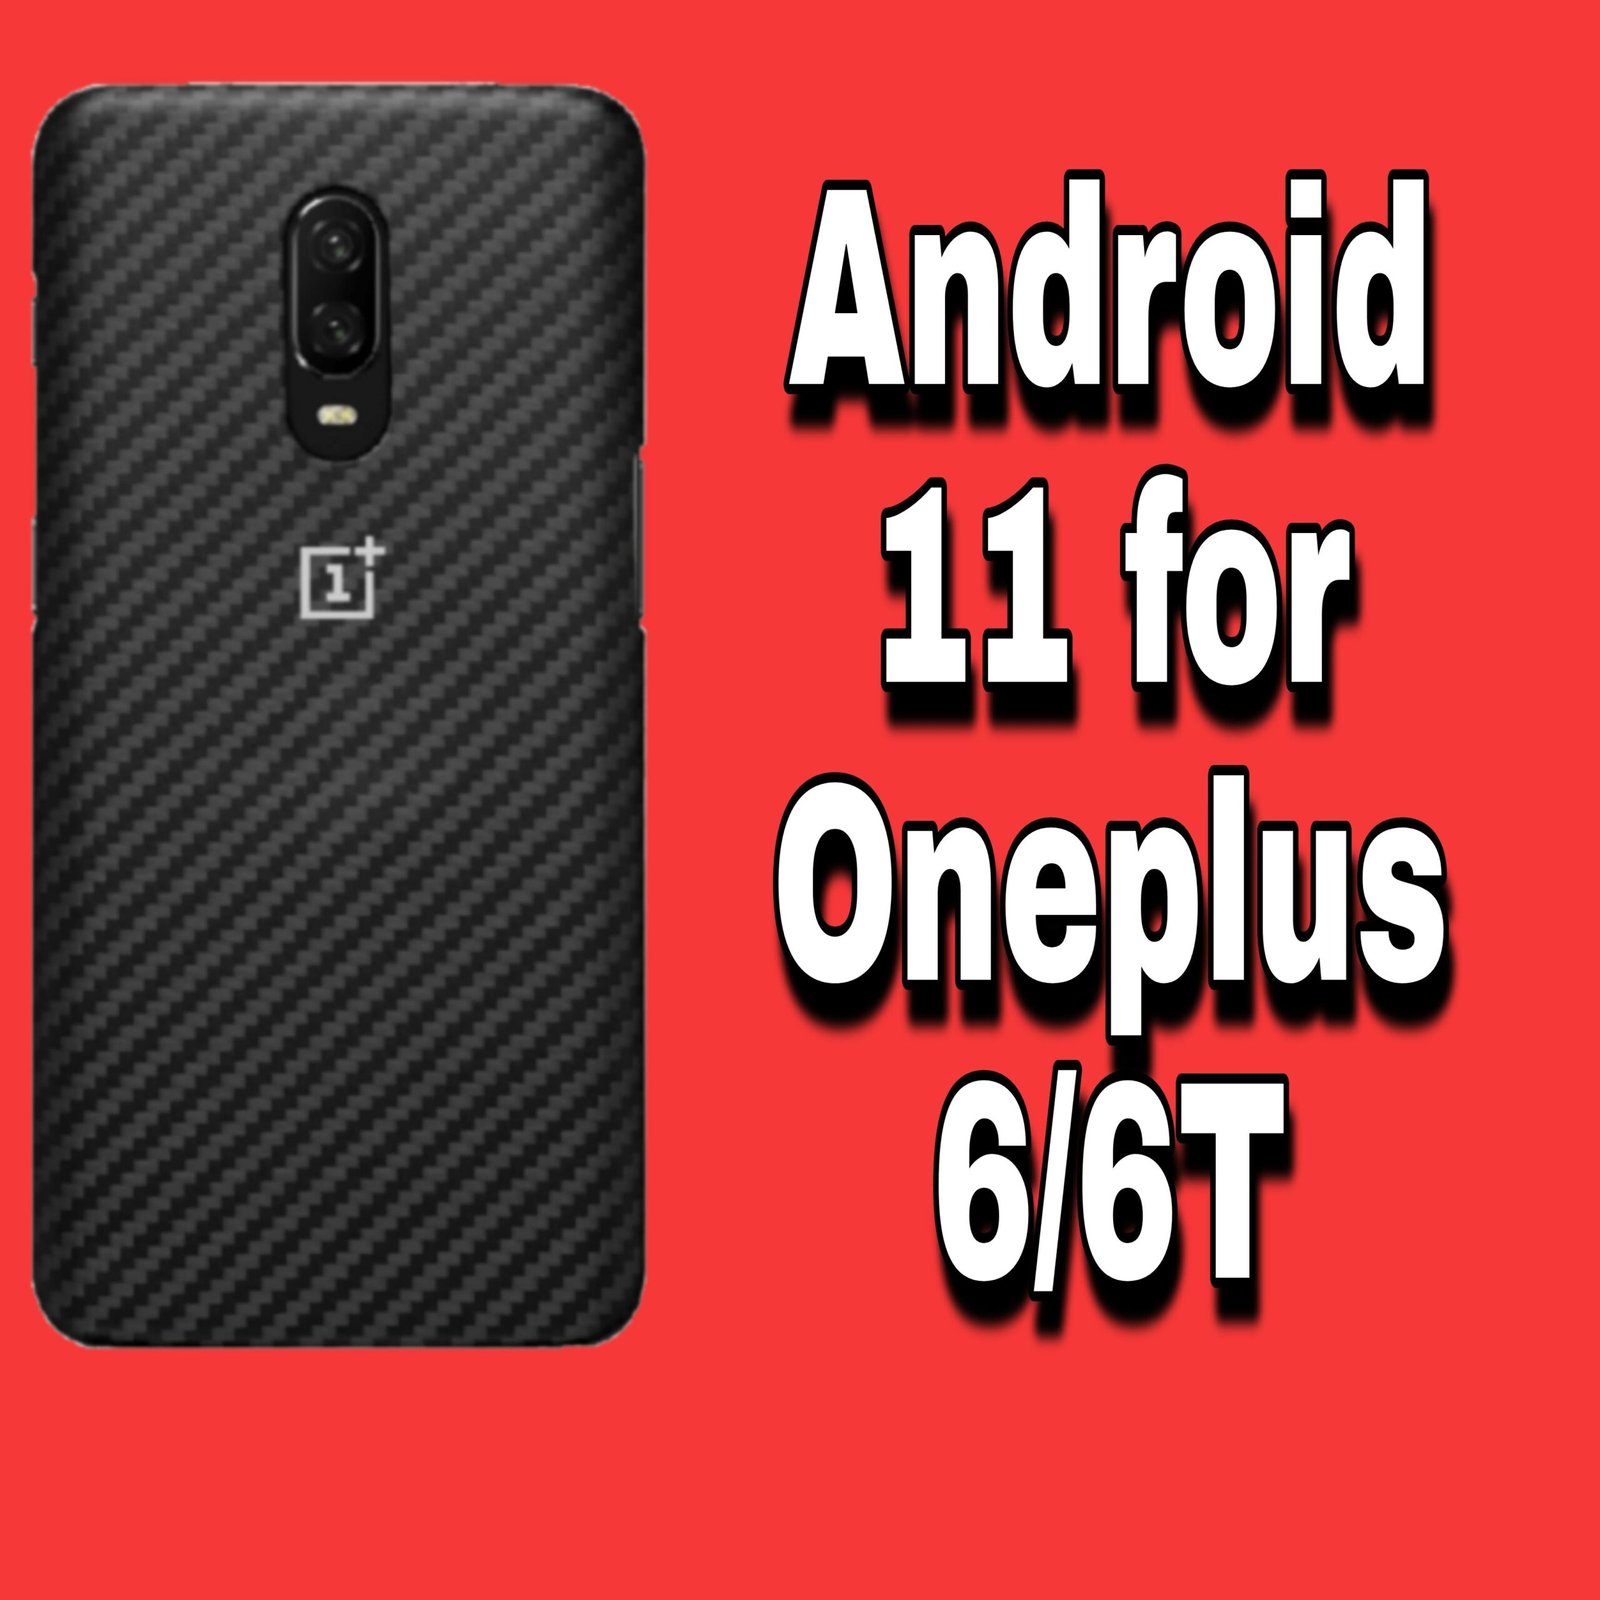 Finally Android 11 is here for Oneplus 6 and 6T